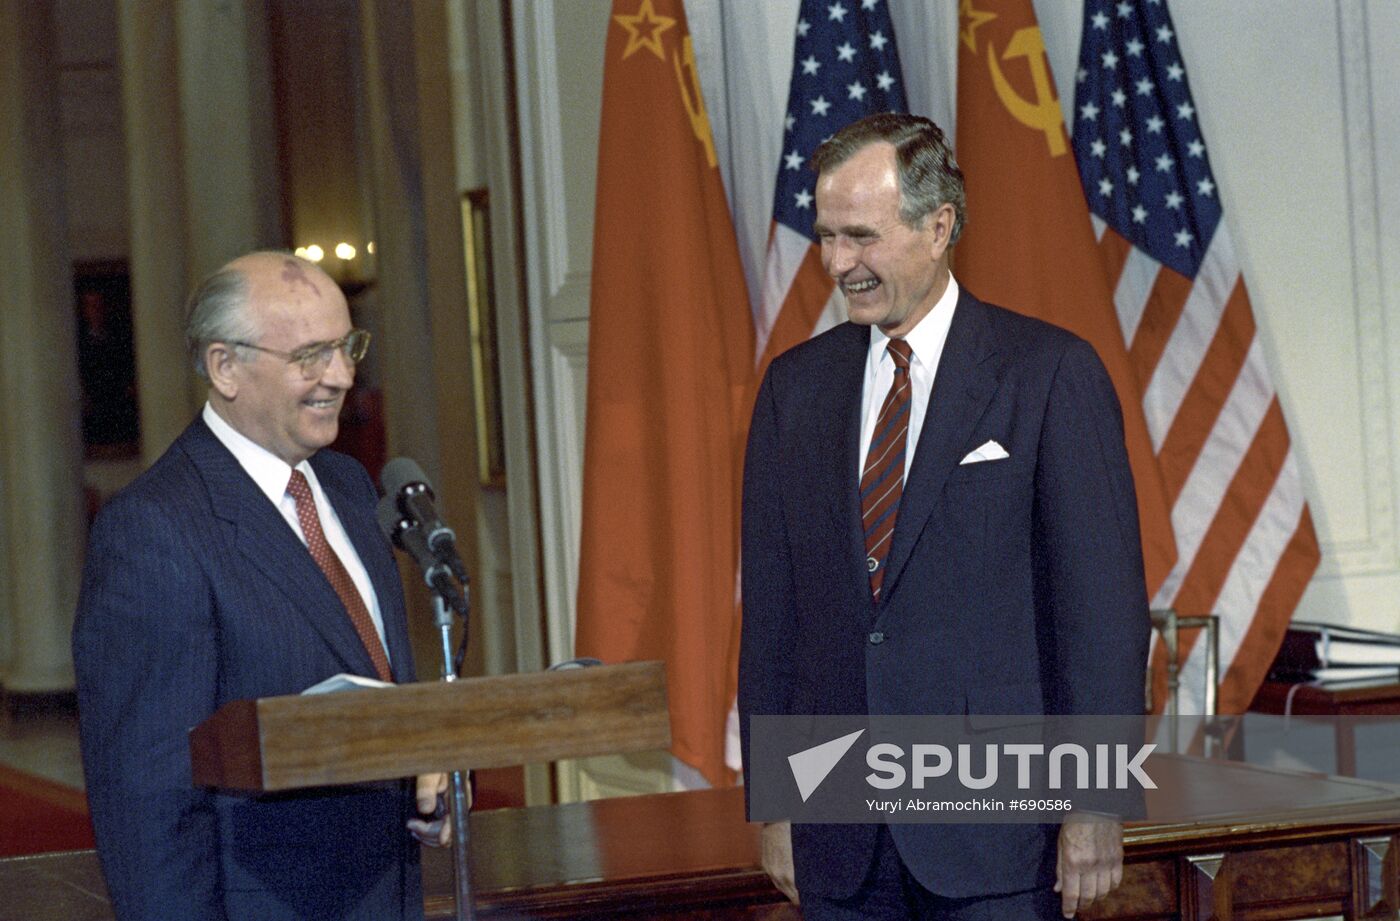 Mikhail Gorbachev and George H.W. Bush after signing documents